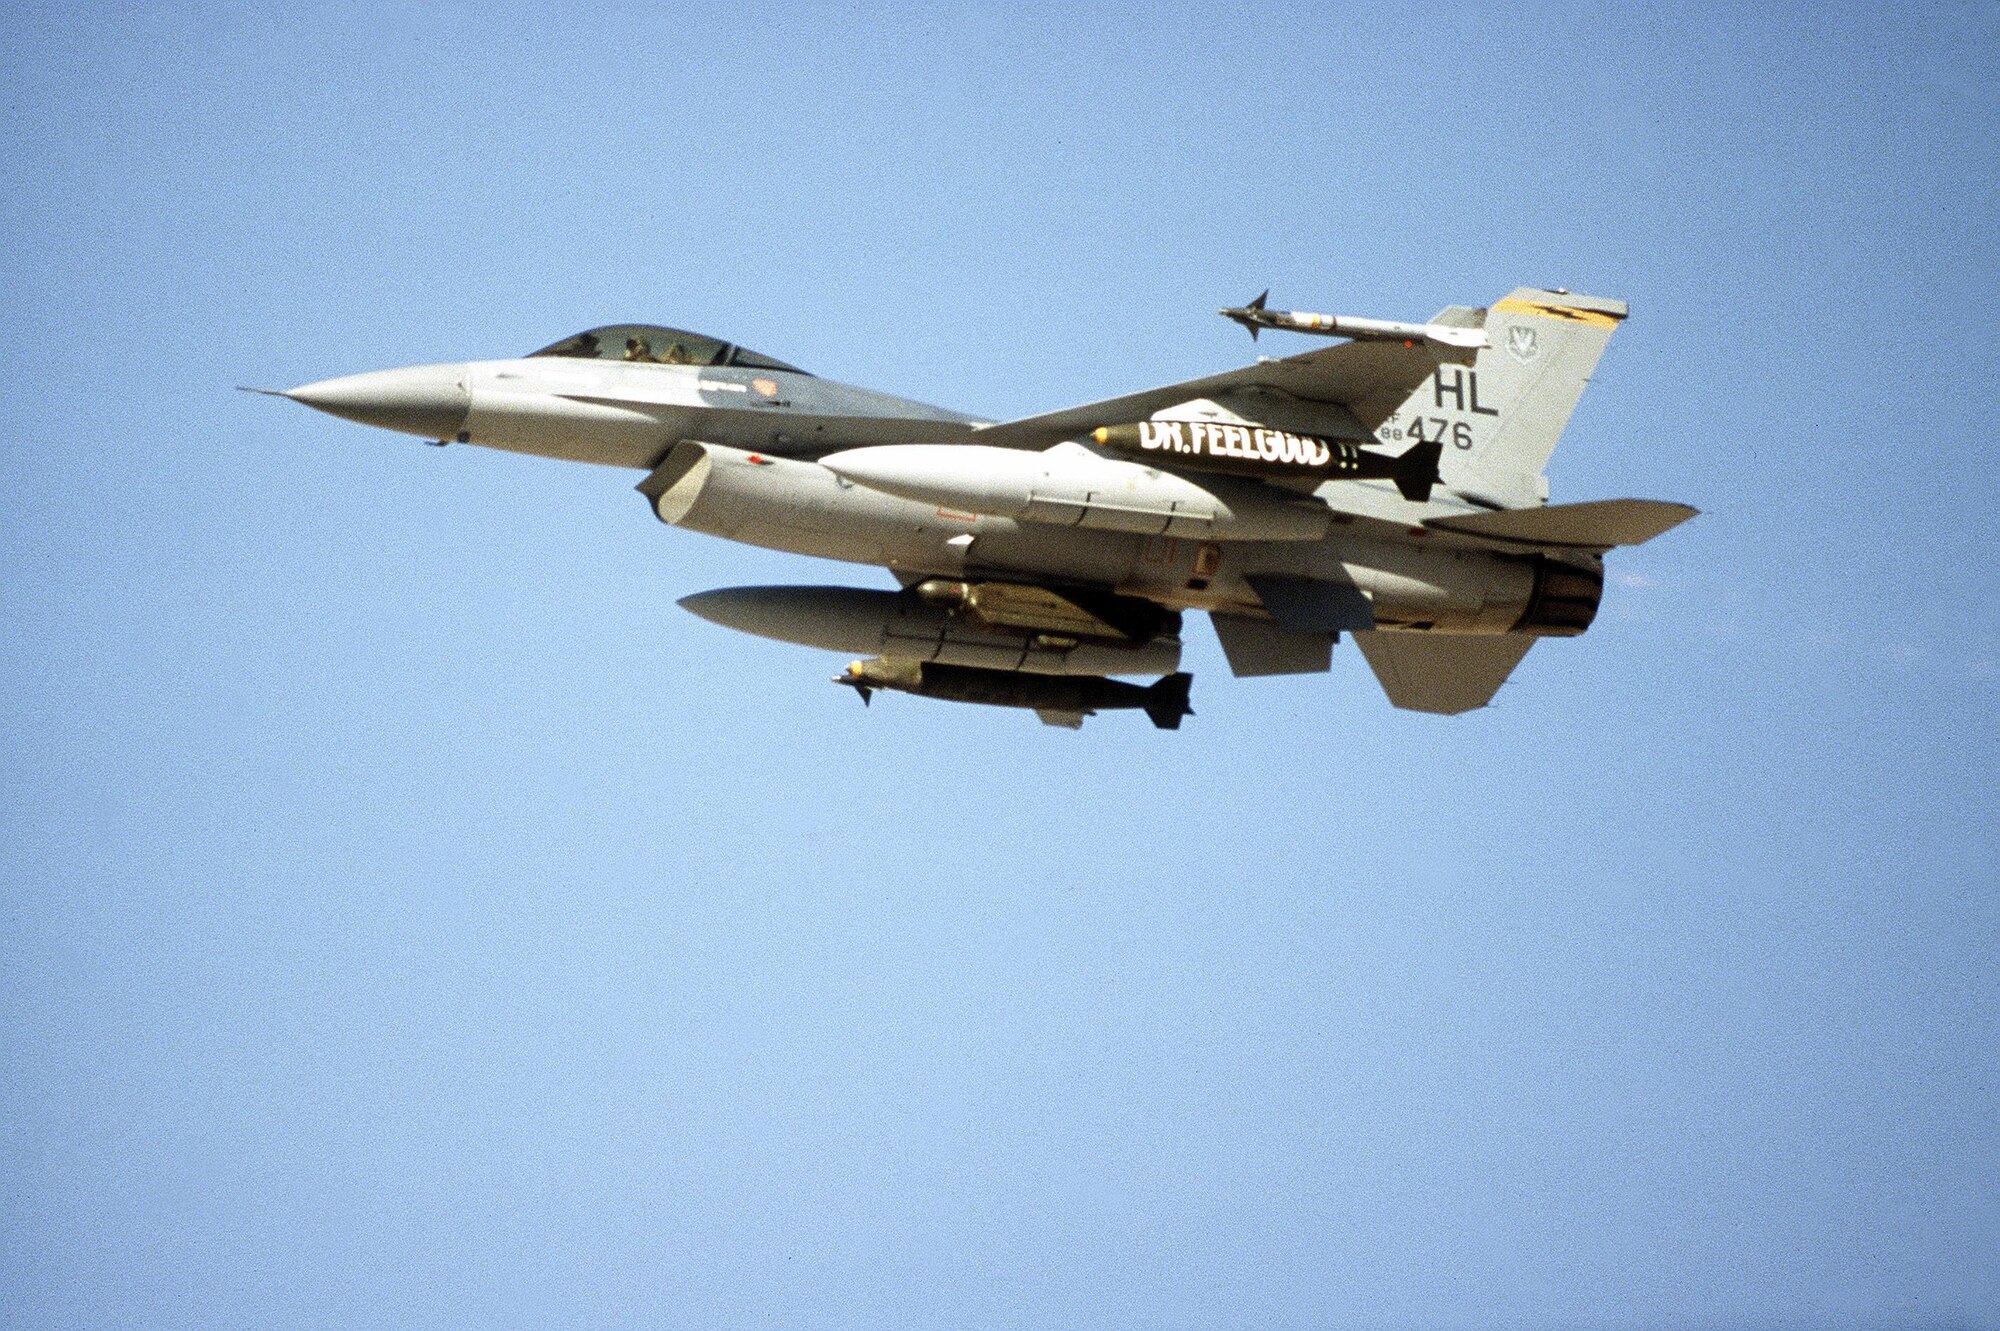 An F-16C Fighting Falcon aircraft of the 388th Tactical Fighter Wing flies out on a mission during Operation Desert Storm. The aircraft is armed with AIM-9 Sidewinder missiles and Mark 84 2,000-pound bombs. (U.S. Air Force photo)